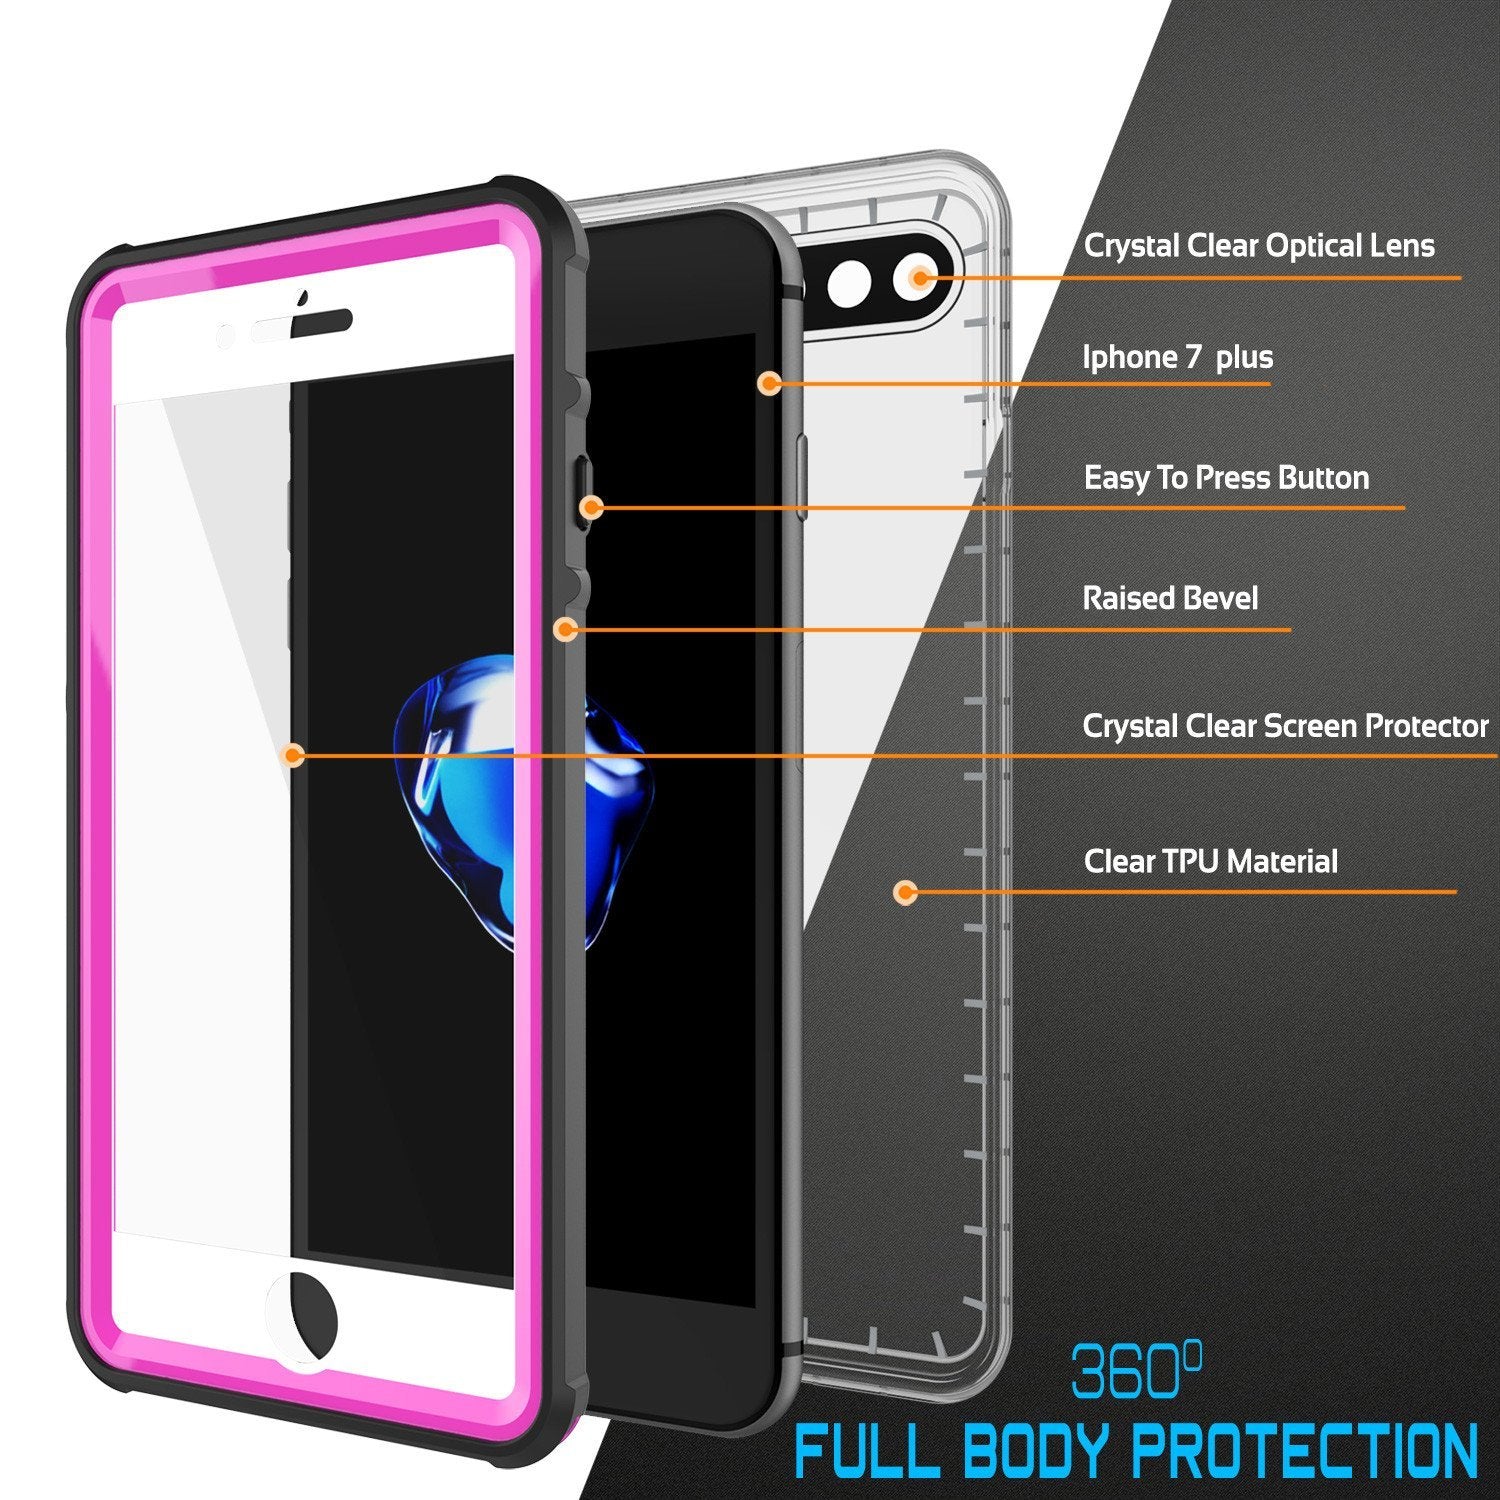 iPhone 8+ Plus Waterproof Case, PUNKcase CRYSTAL Pink W/ Attached Screen Protector  | Warranty - PunkCase NZ